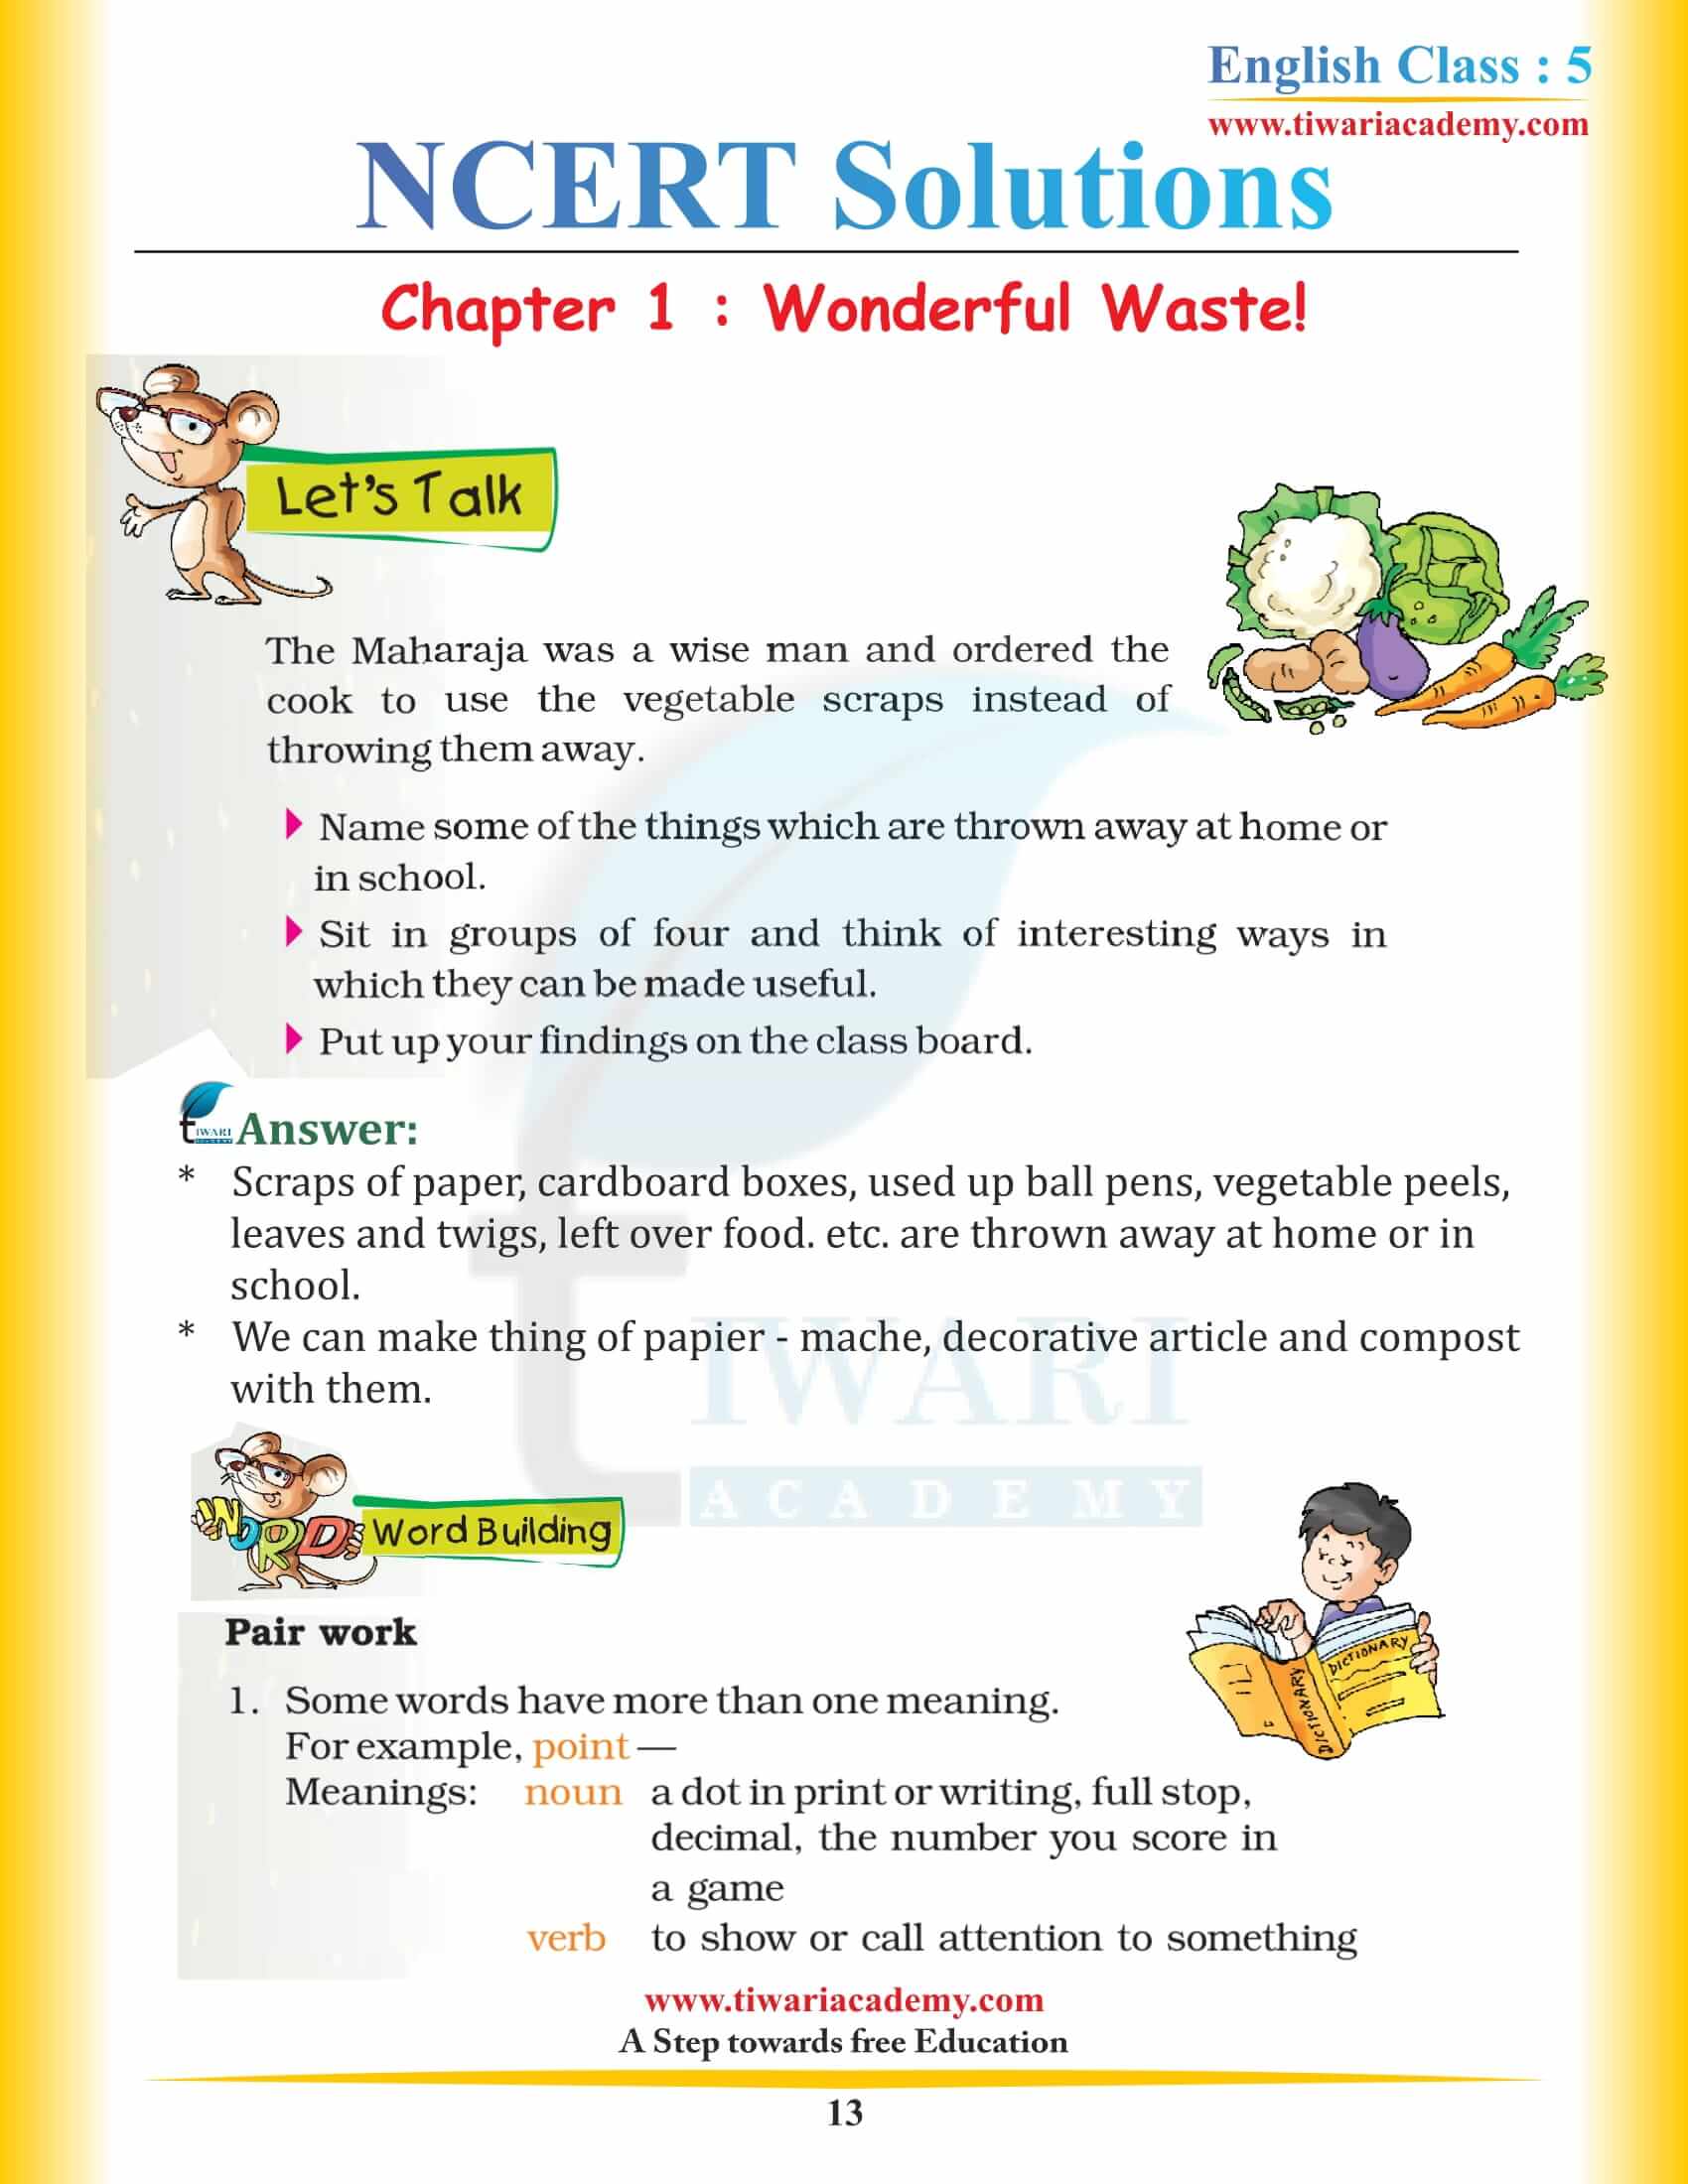 NCERT Solutions for Class 5 English Chapter 1 Wonderful Waste cbse answers